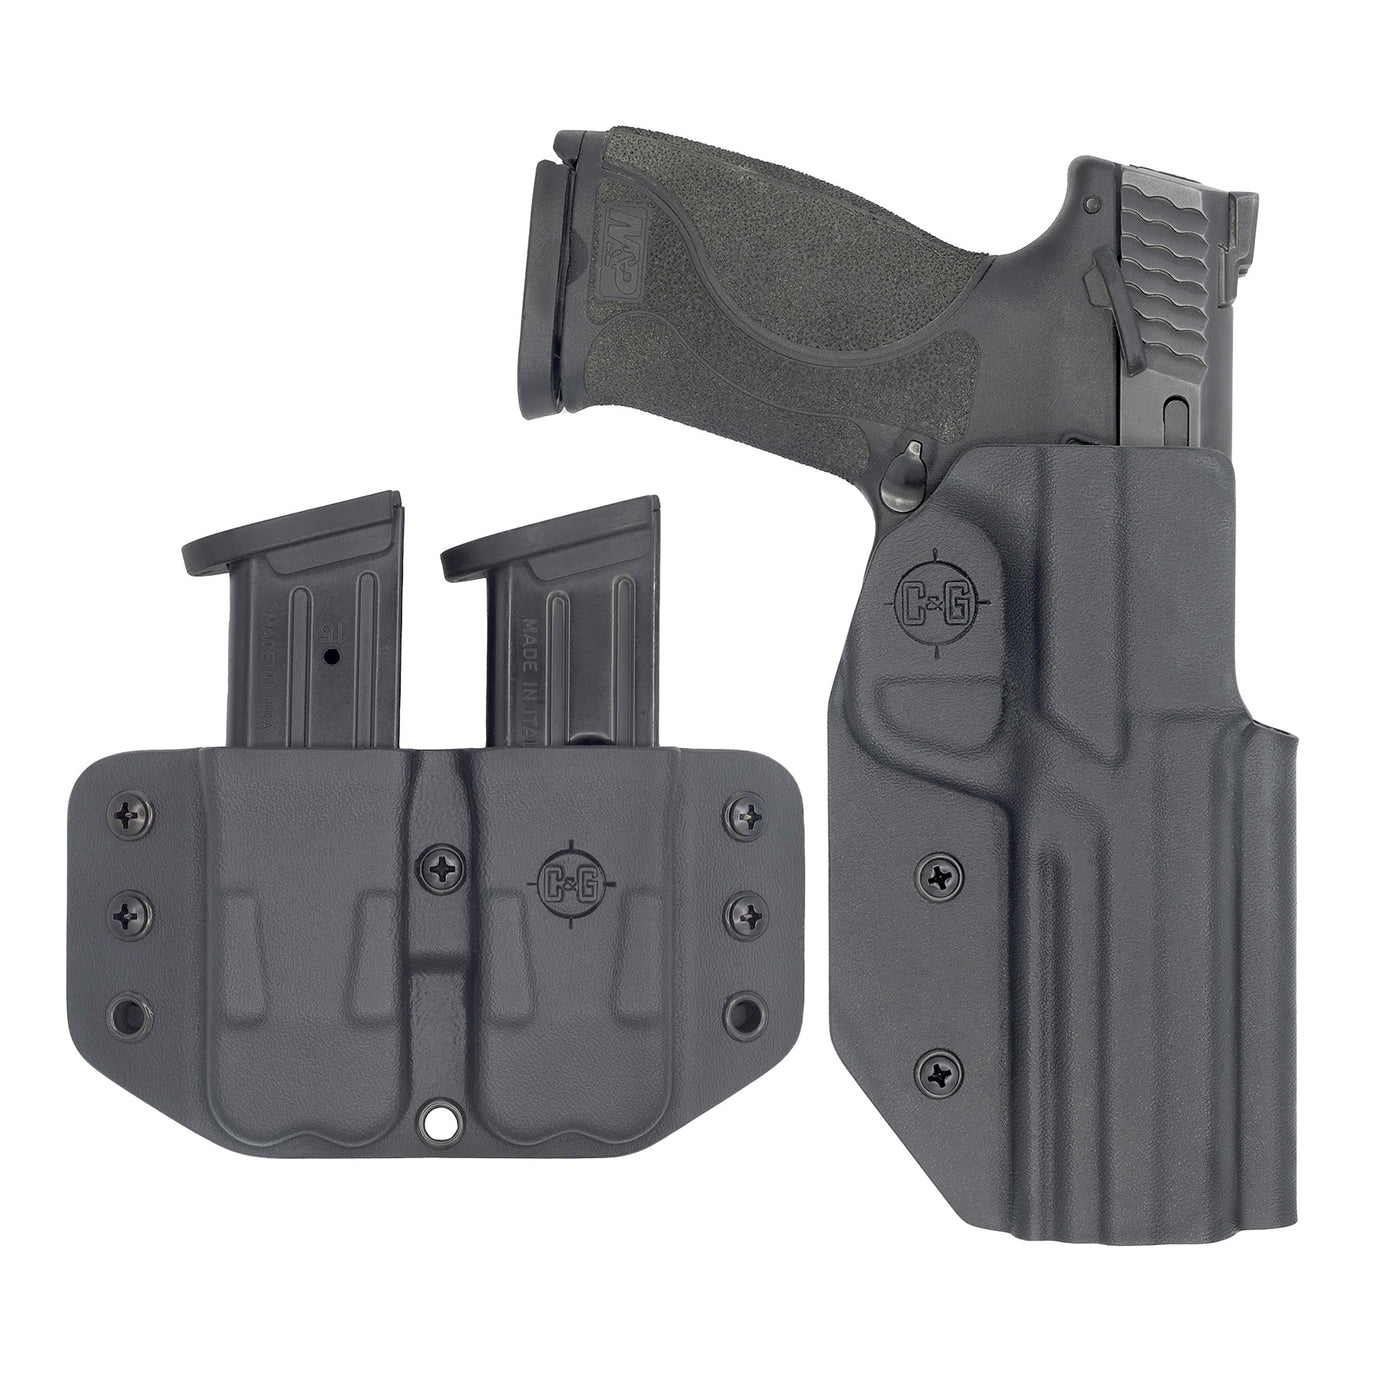 C&G Holsters Competition Starter Kit that is IDPA, USPSA & 3-GUN legal for M&P 9/40 all holstered